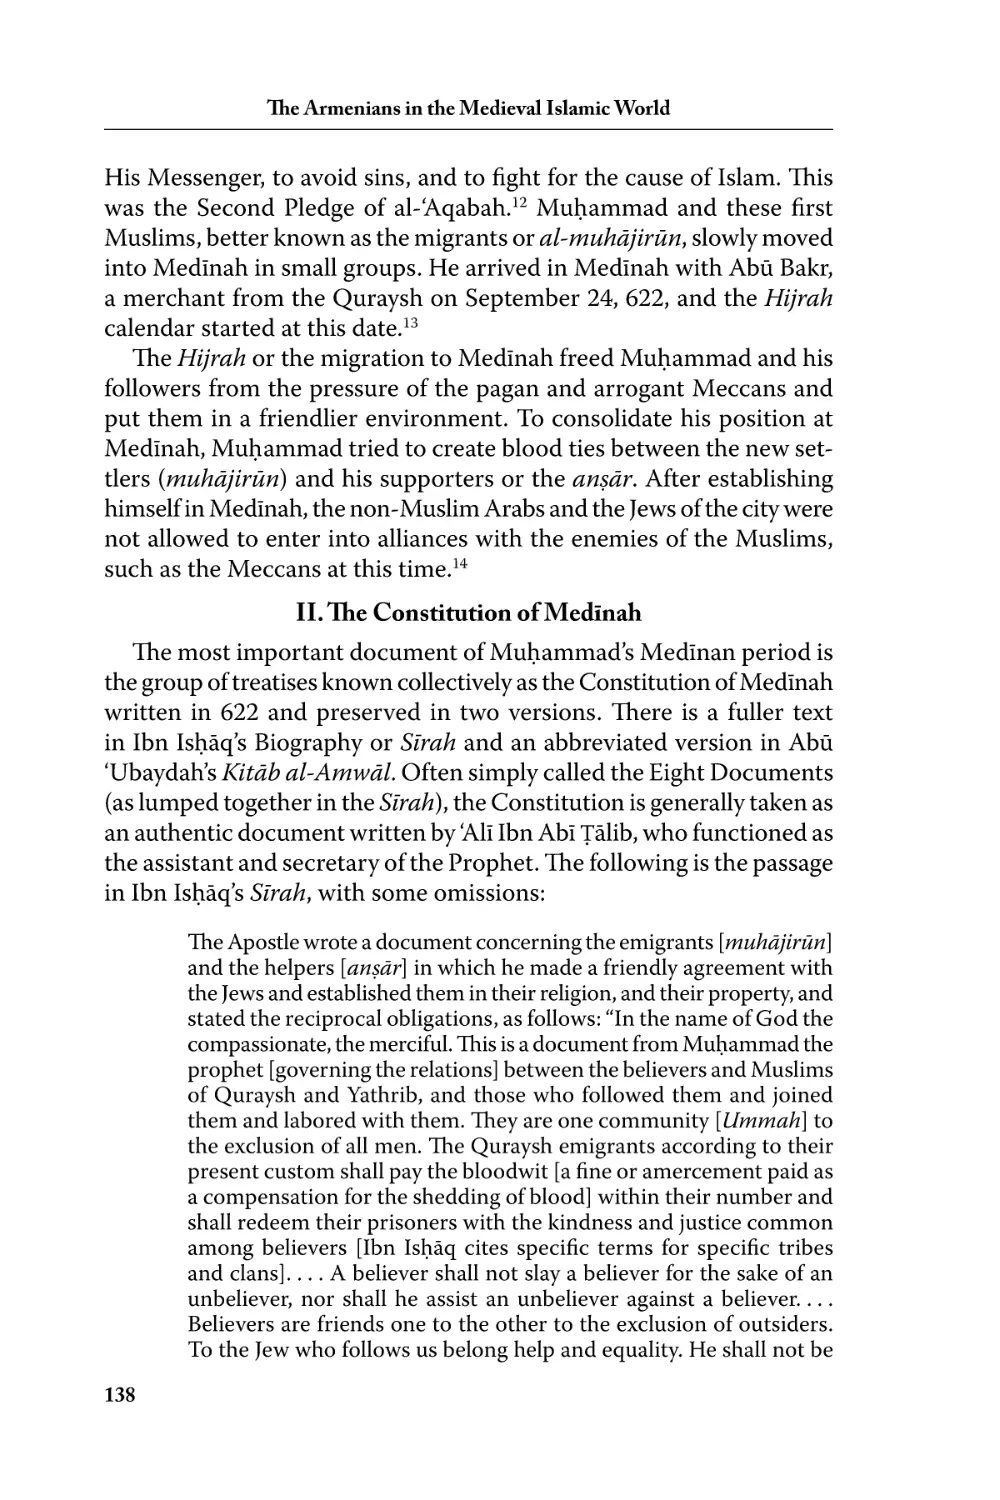 II. The Constitution of Medīnah